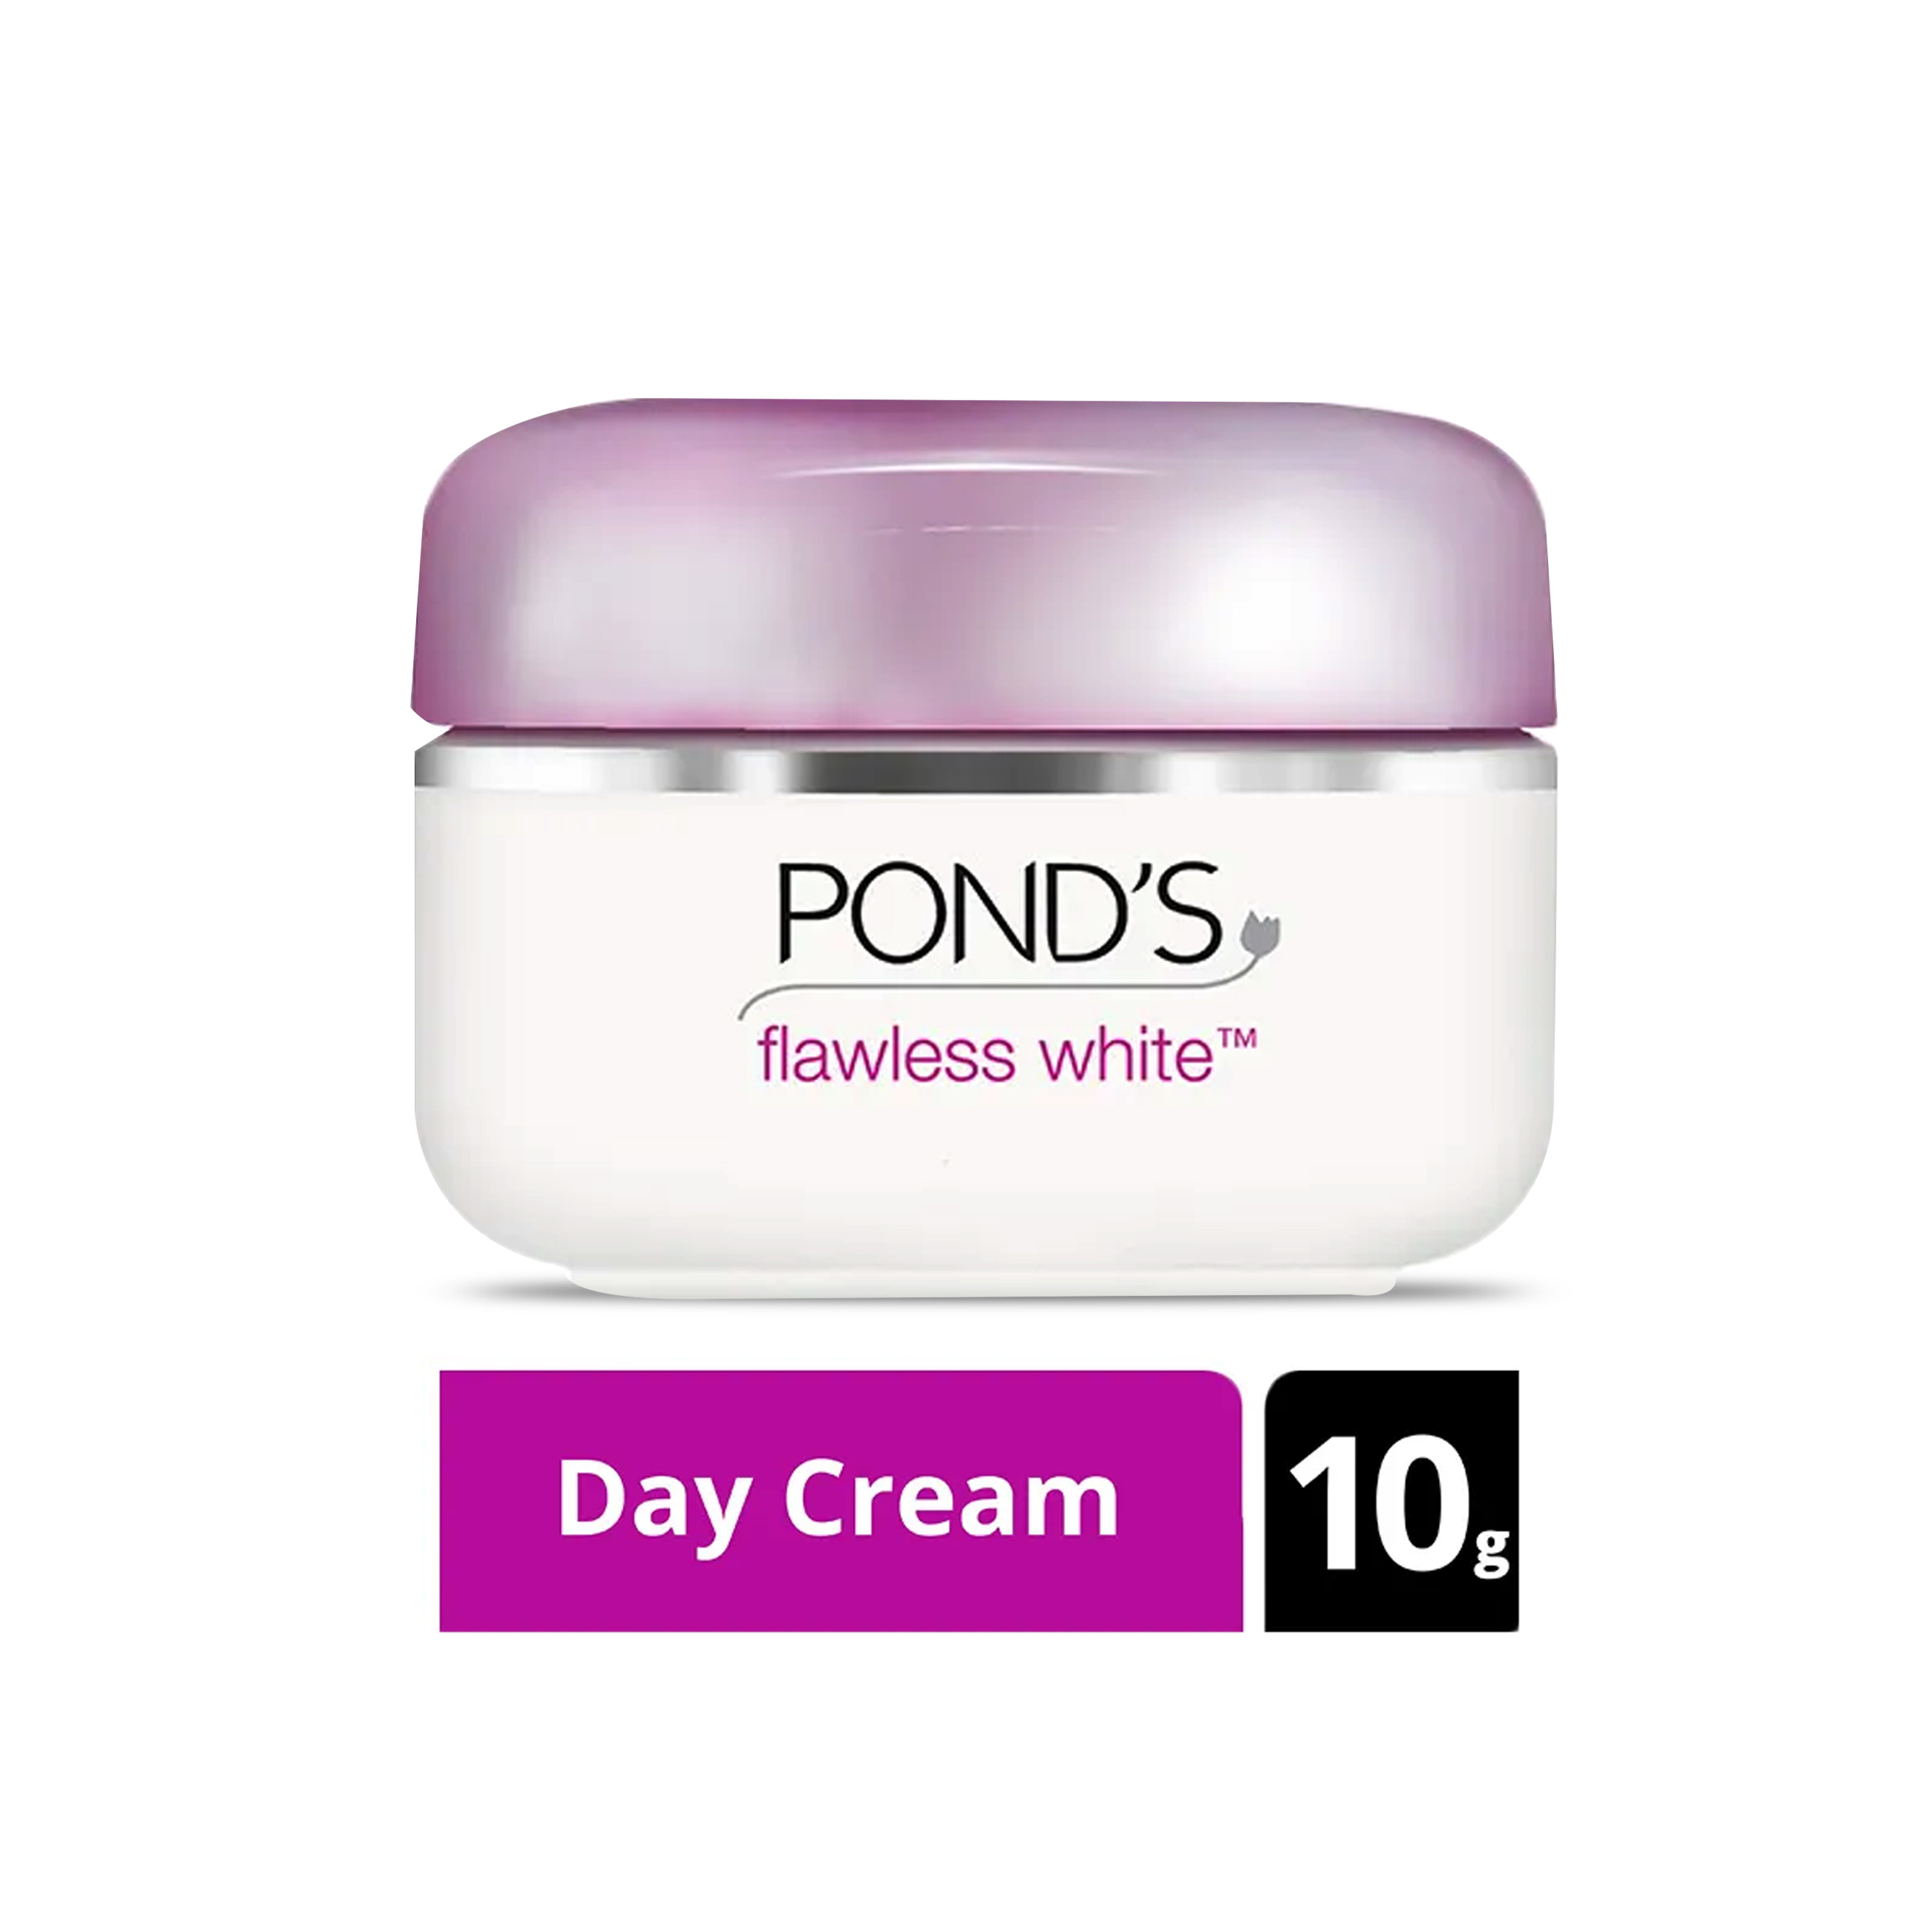 PONDS Flawless White Day Cream SPF 18 PA++ 10 gr / POND'S Krim Siang